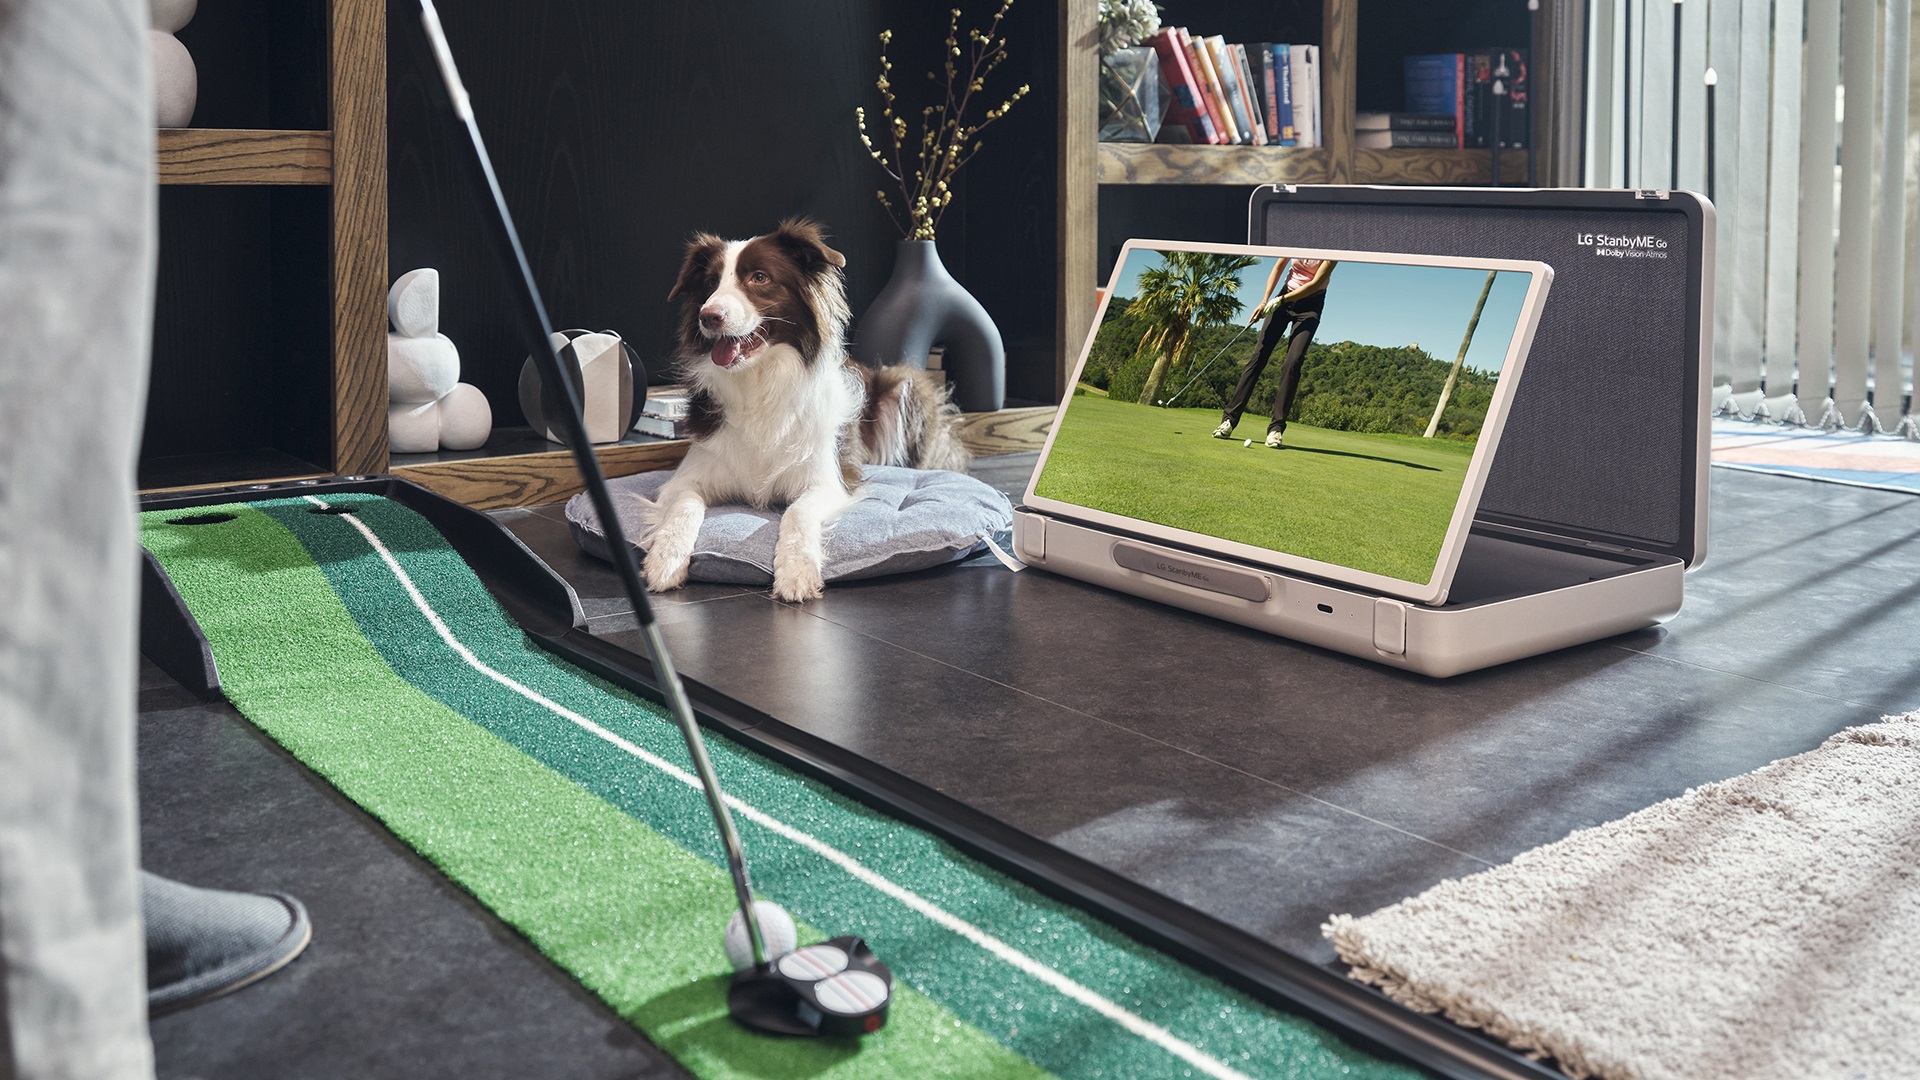 A man putting at home while watching a golf tutorial through LG StanbyME Go’s landscape mode